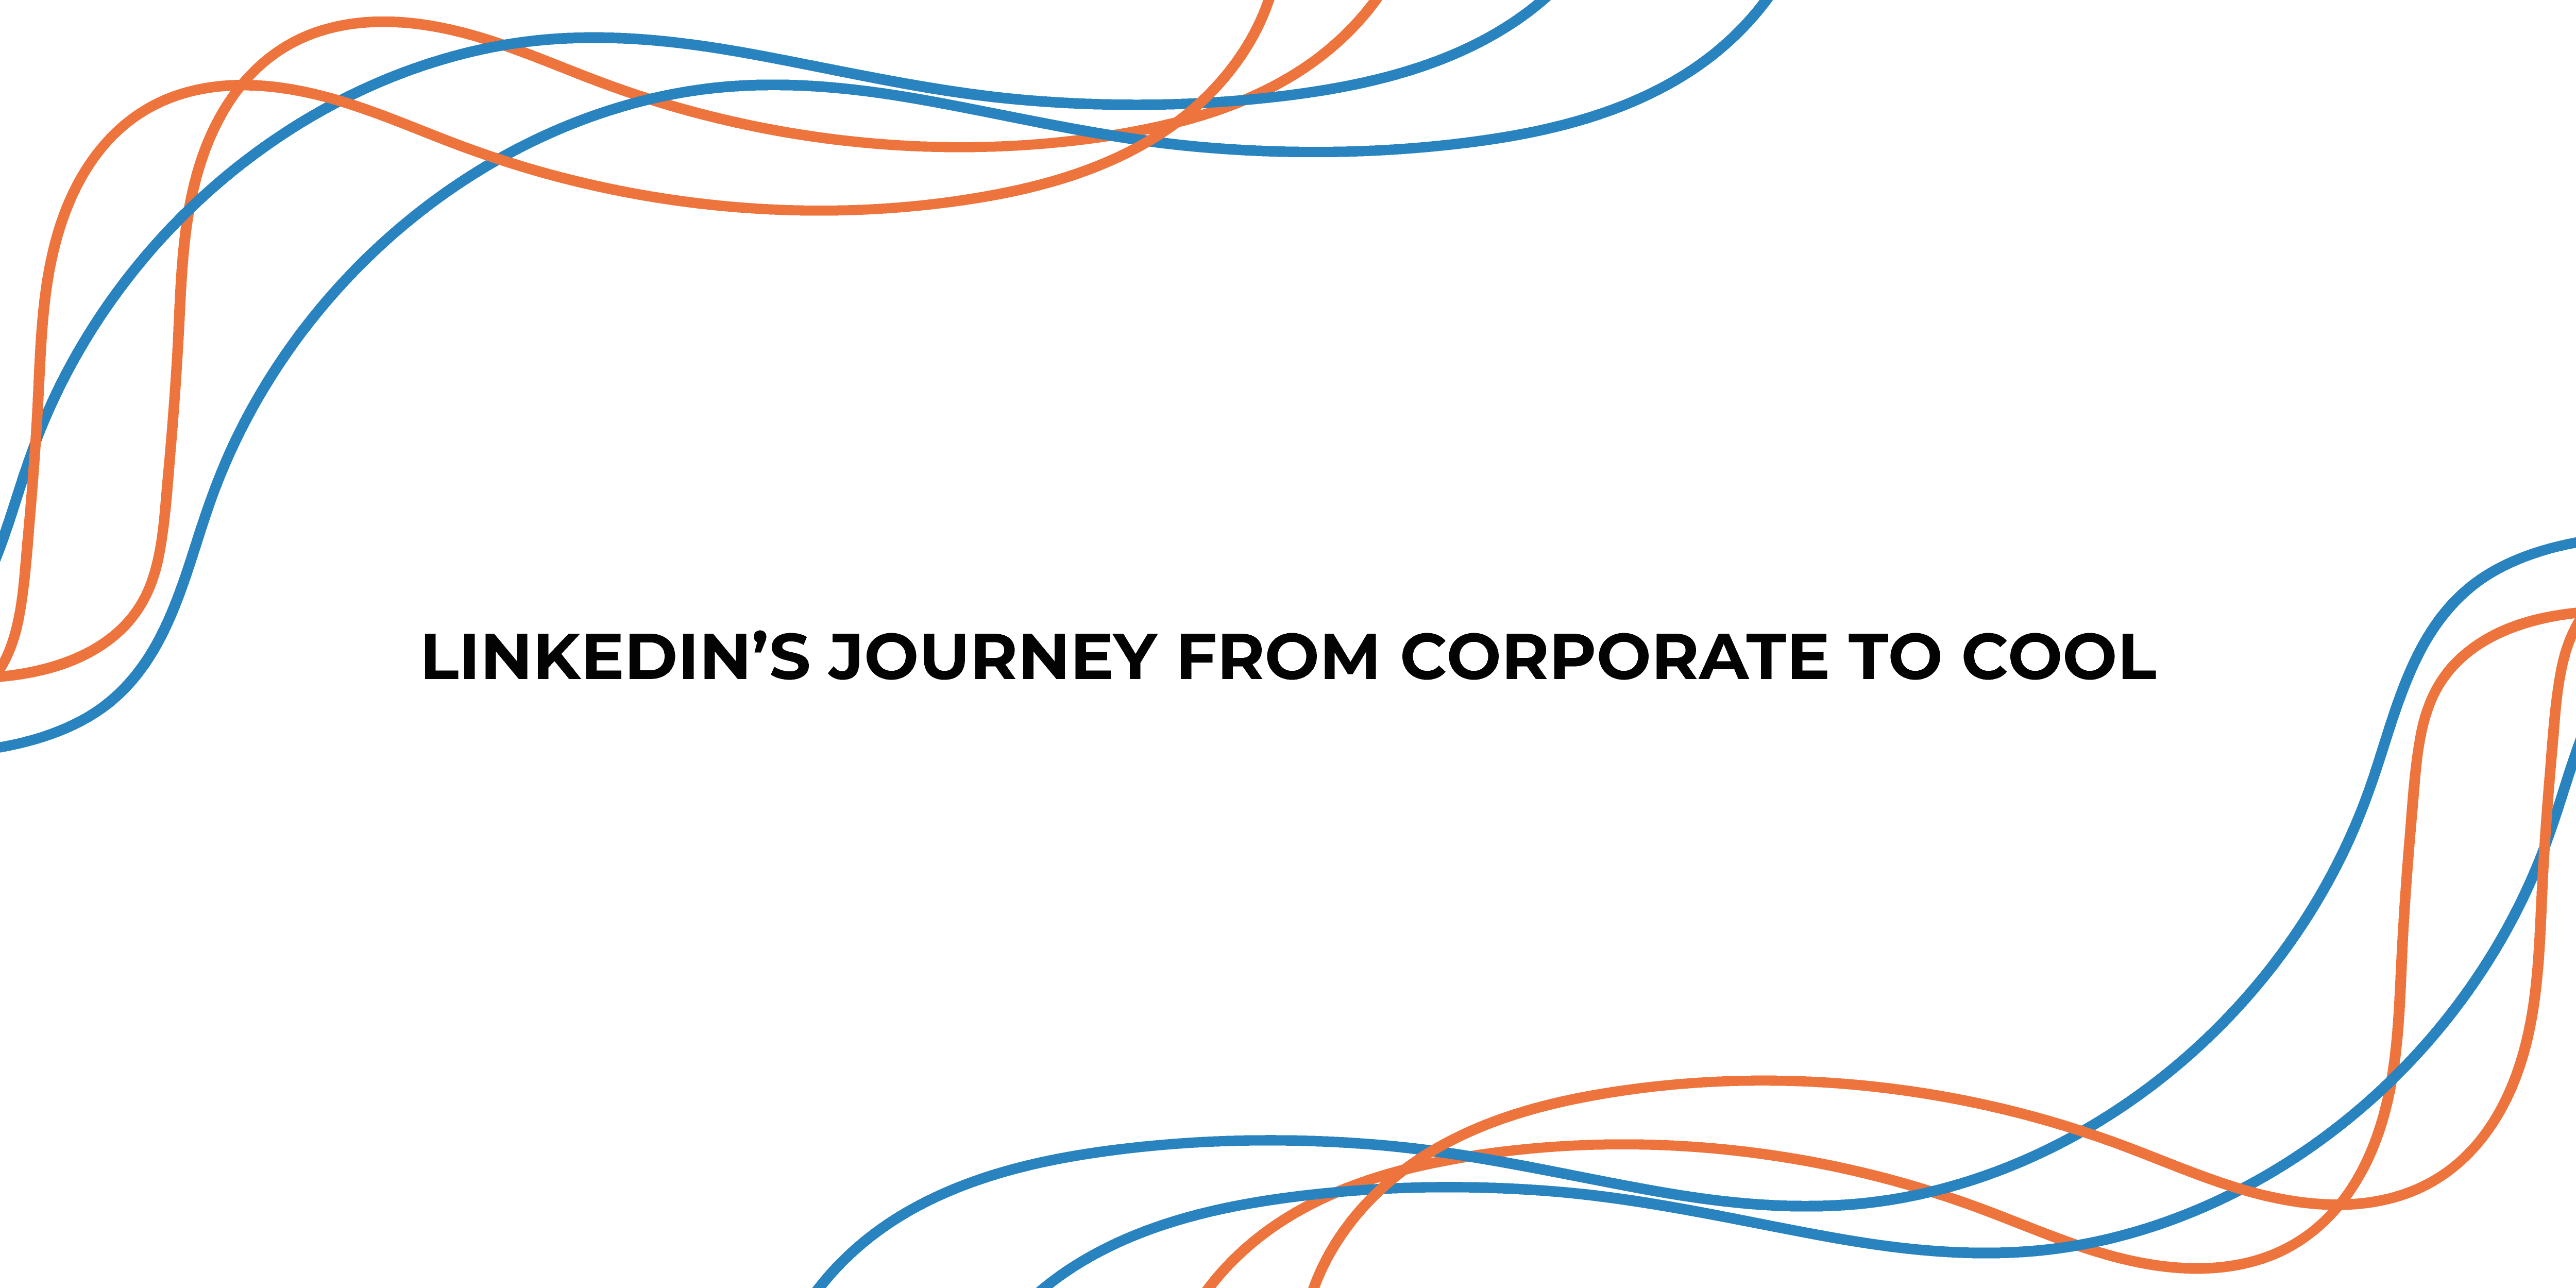 LinkedIn’s Journey from Corporate to Cool